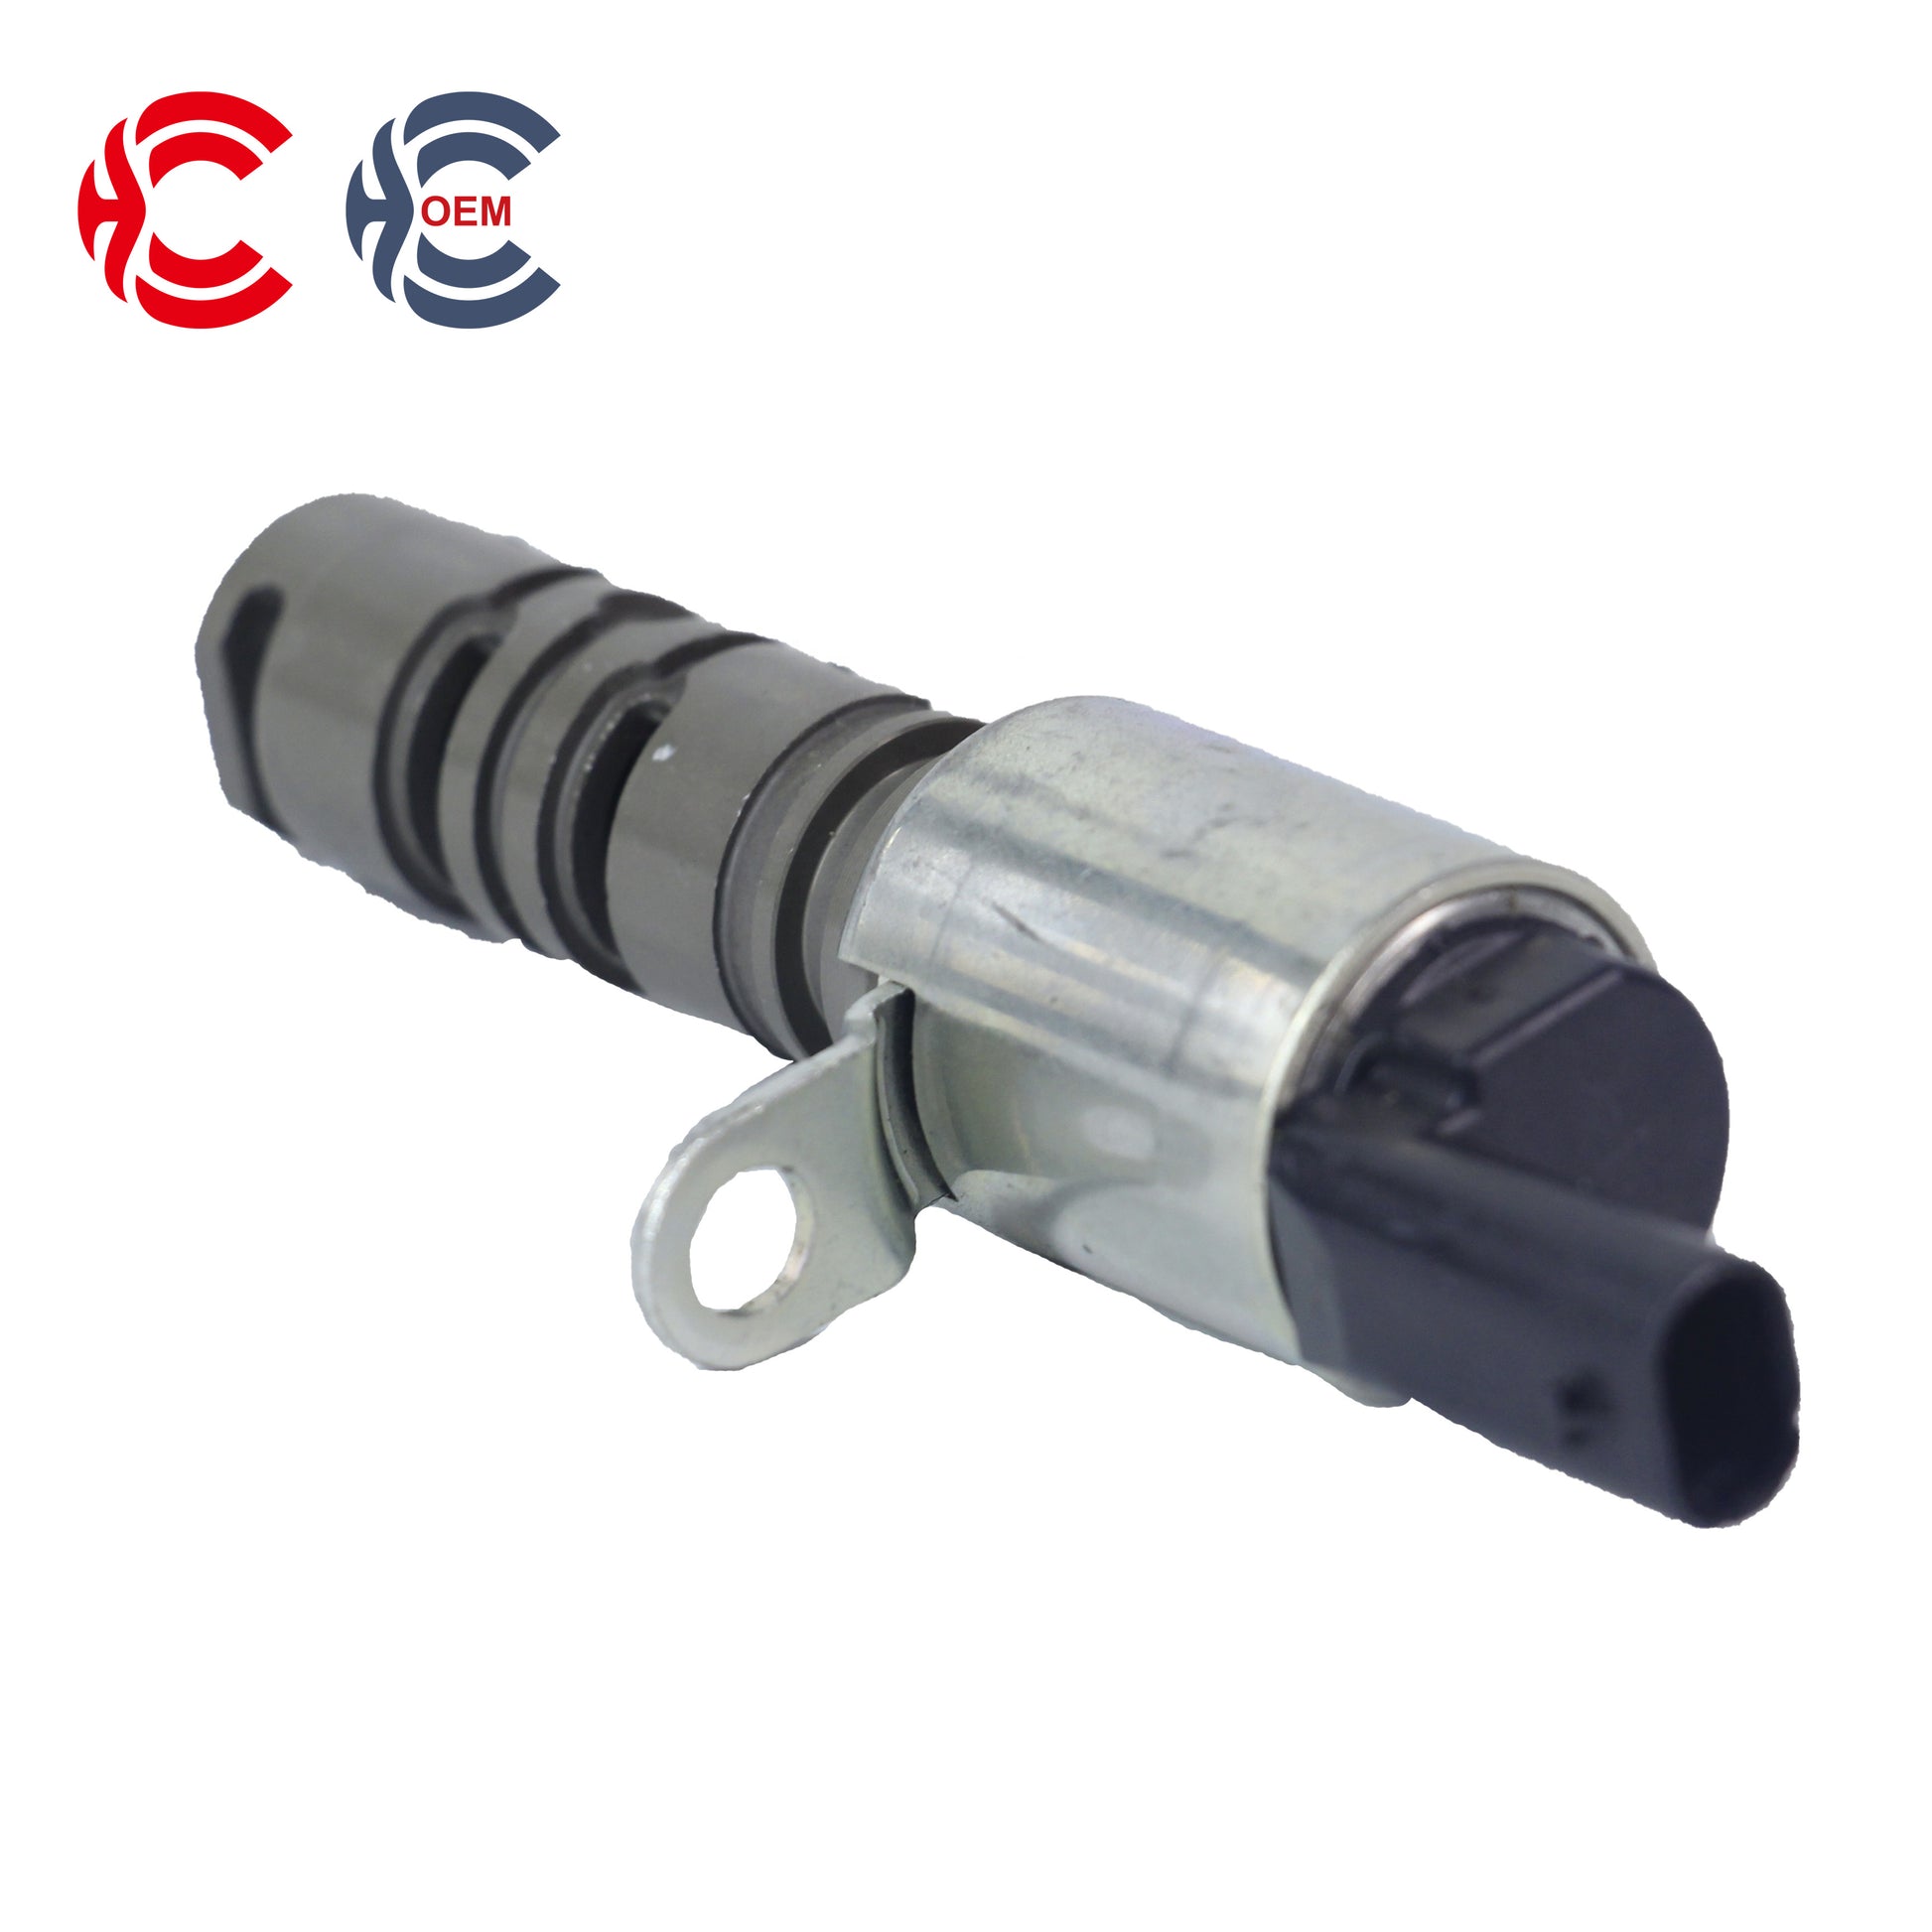 OEM: 455F5710G2Material: ABS metalColor: black silverOrigin: Made in ChinaWeight: 300gPacking List: 1* VVT Solenoid Valve More ServiceWe can provide OEM Manufacturing serviceWe can Be your one-step solution for Auto PartsWe can provide technical scheme for you Feel Free to Contact Us, We will get back to you as soon as possible.